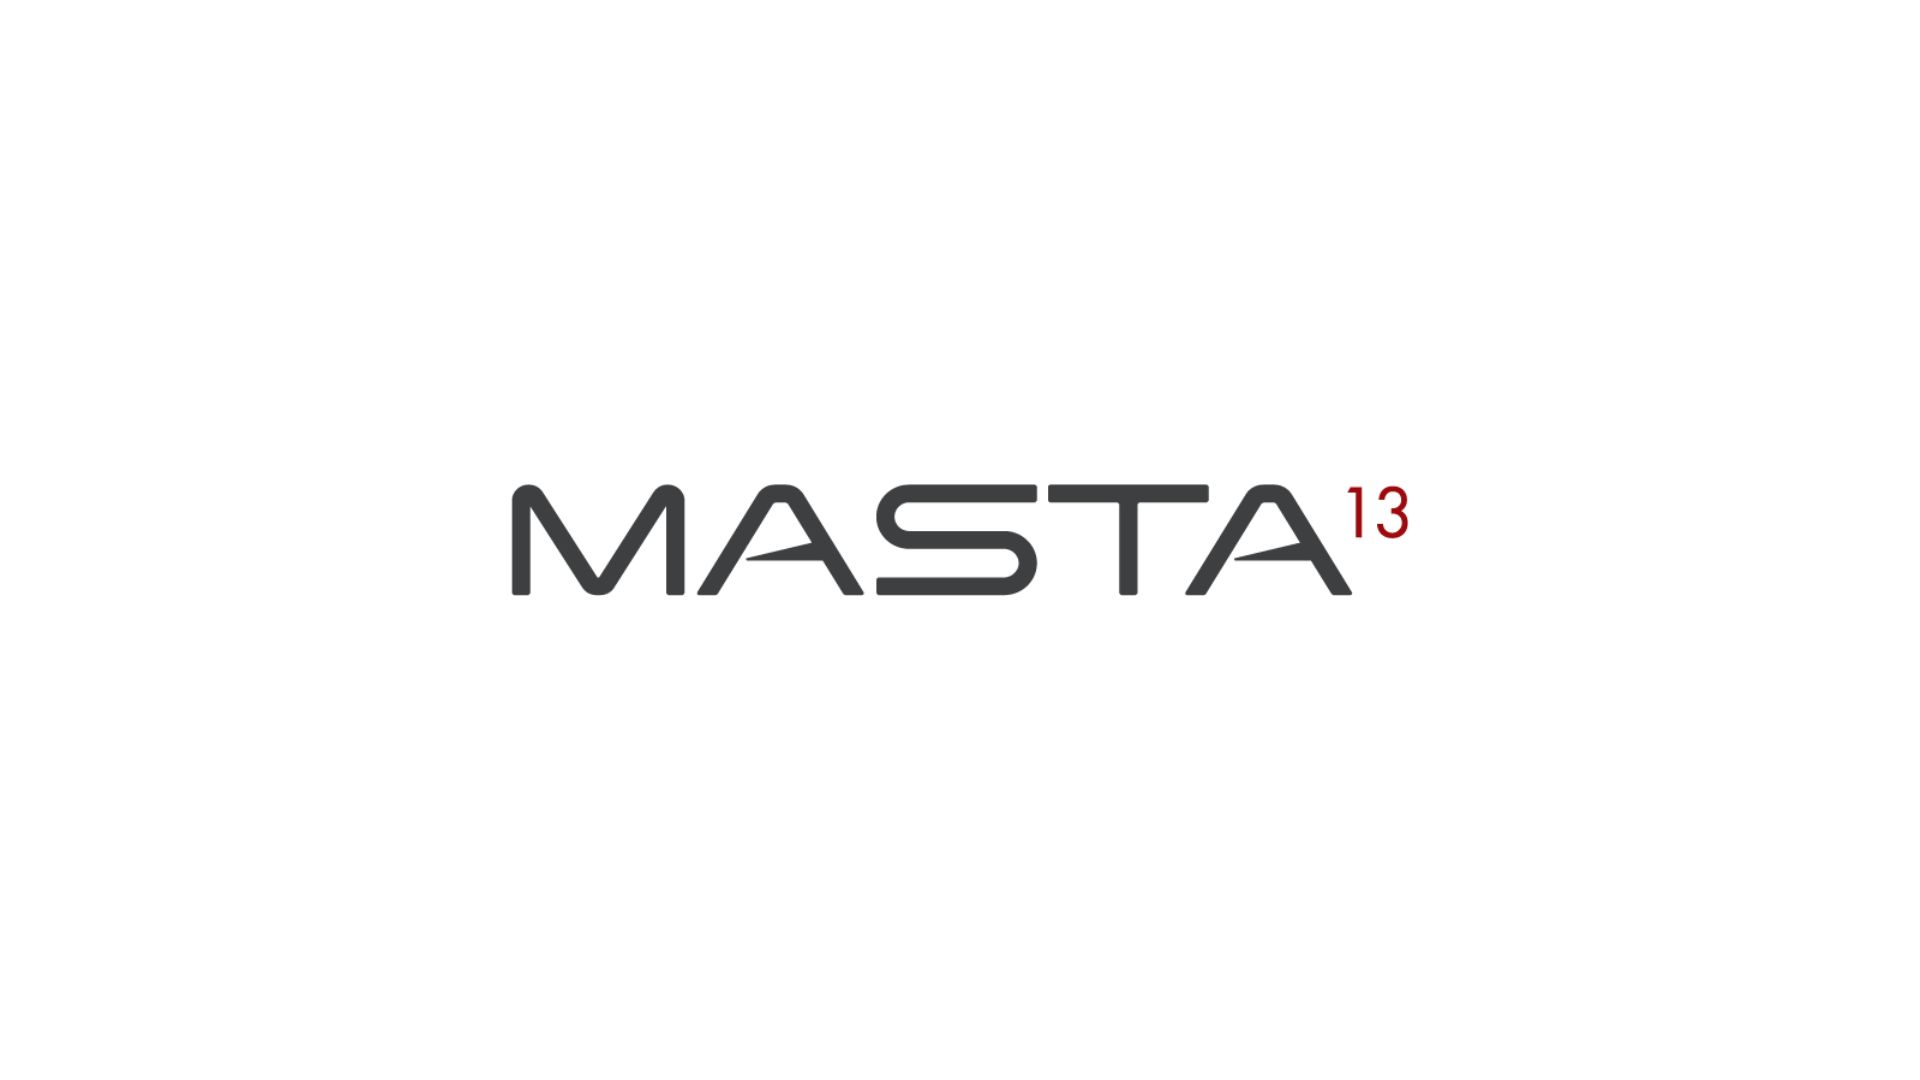 MASTA 13 logo in grey and red.